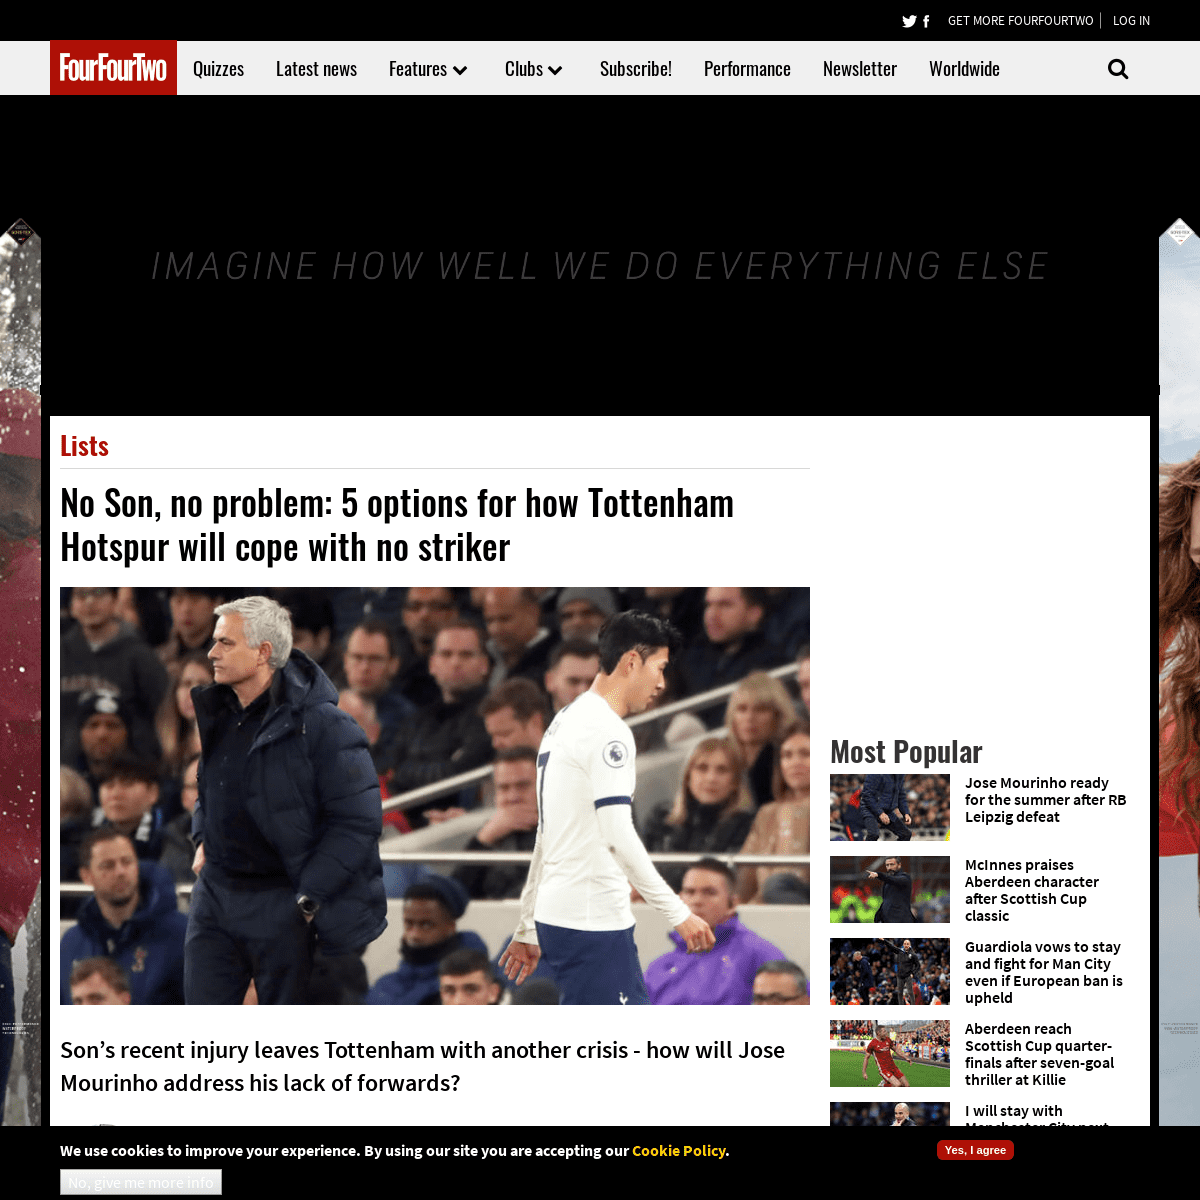 A complete backup of www.fourfourtwo.com/features/no-son-heung-min-harry-kane-no-problem-5-options-how-will-tottenham-hotspur-sp